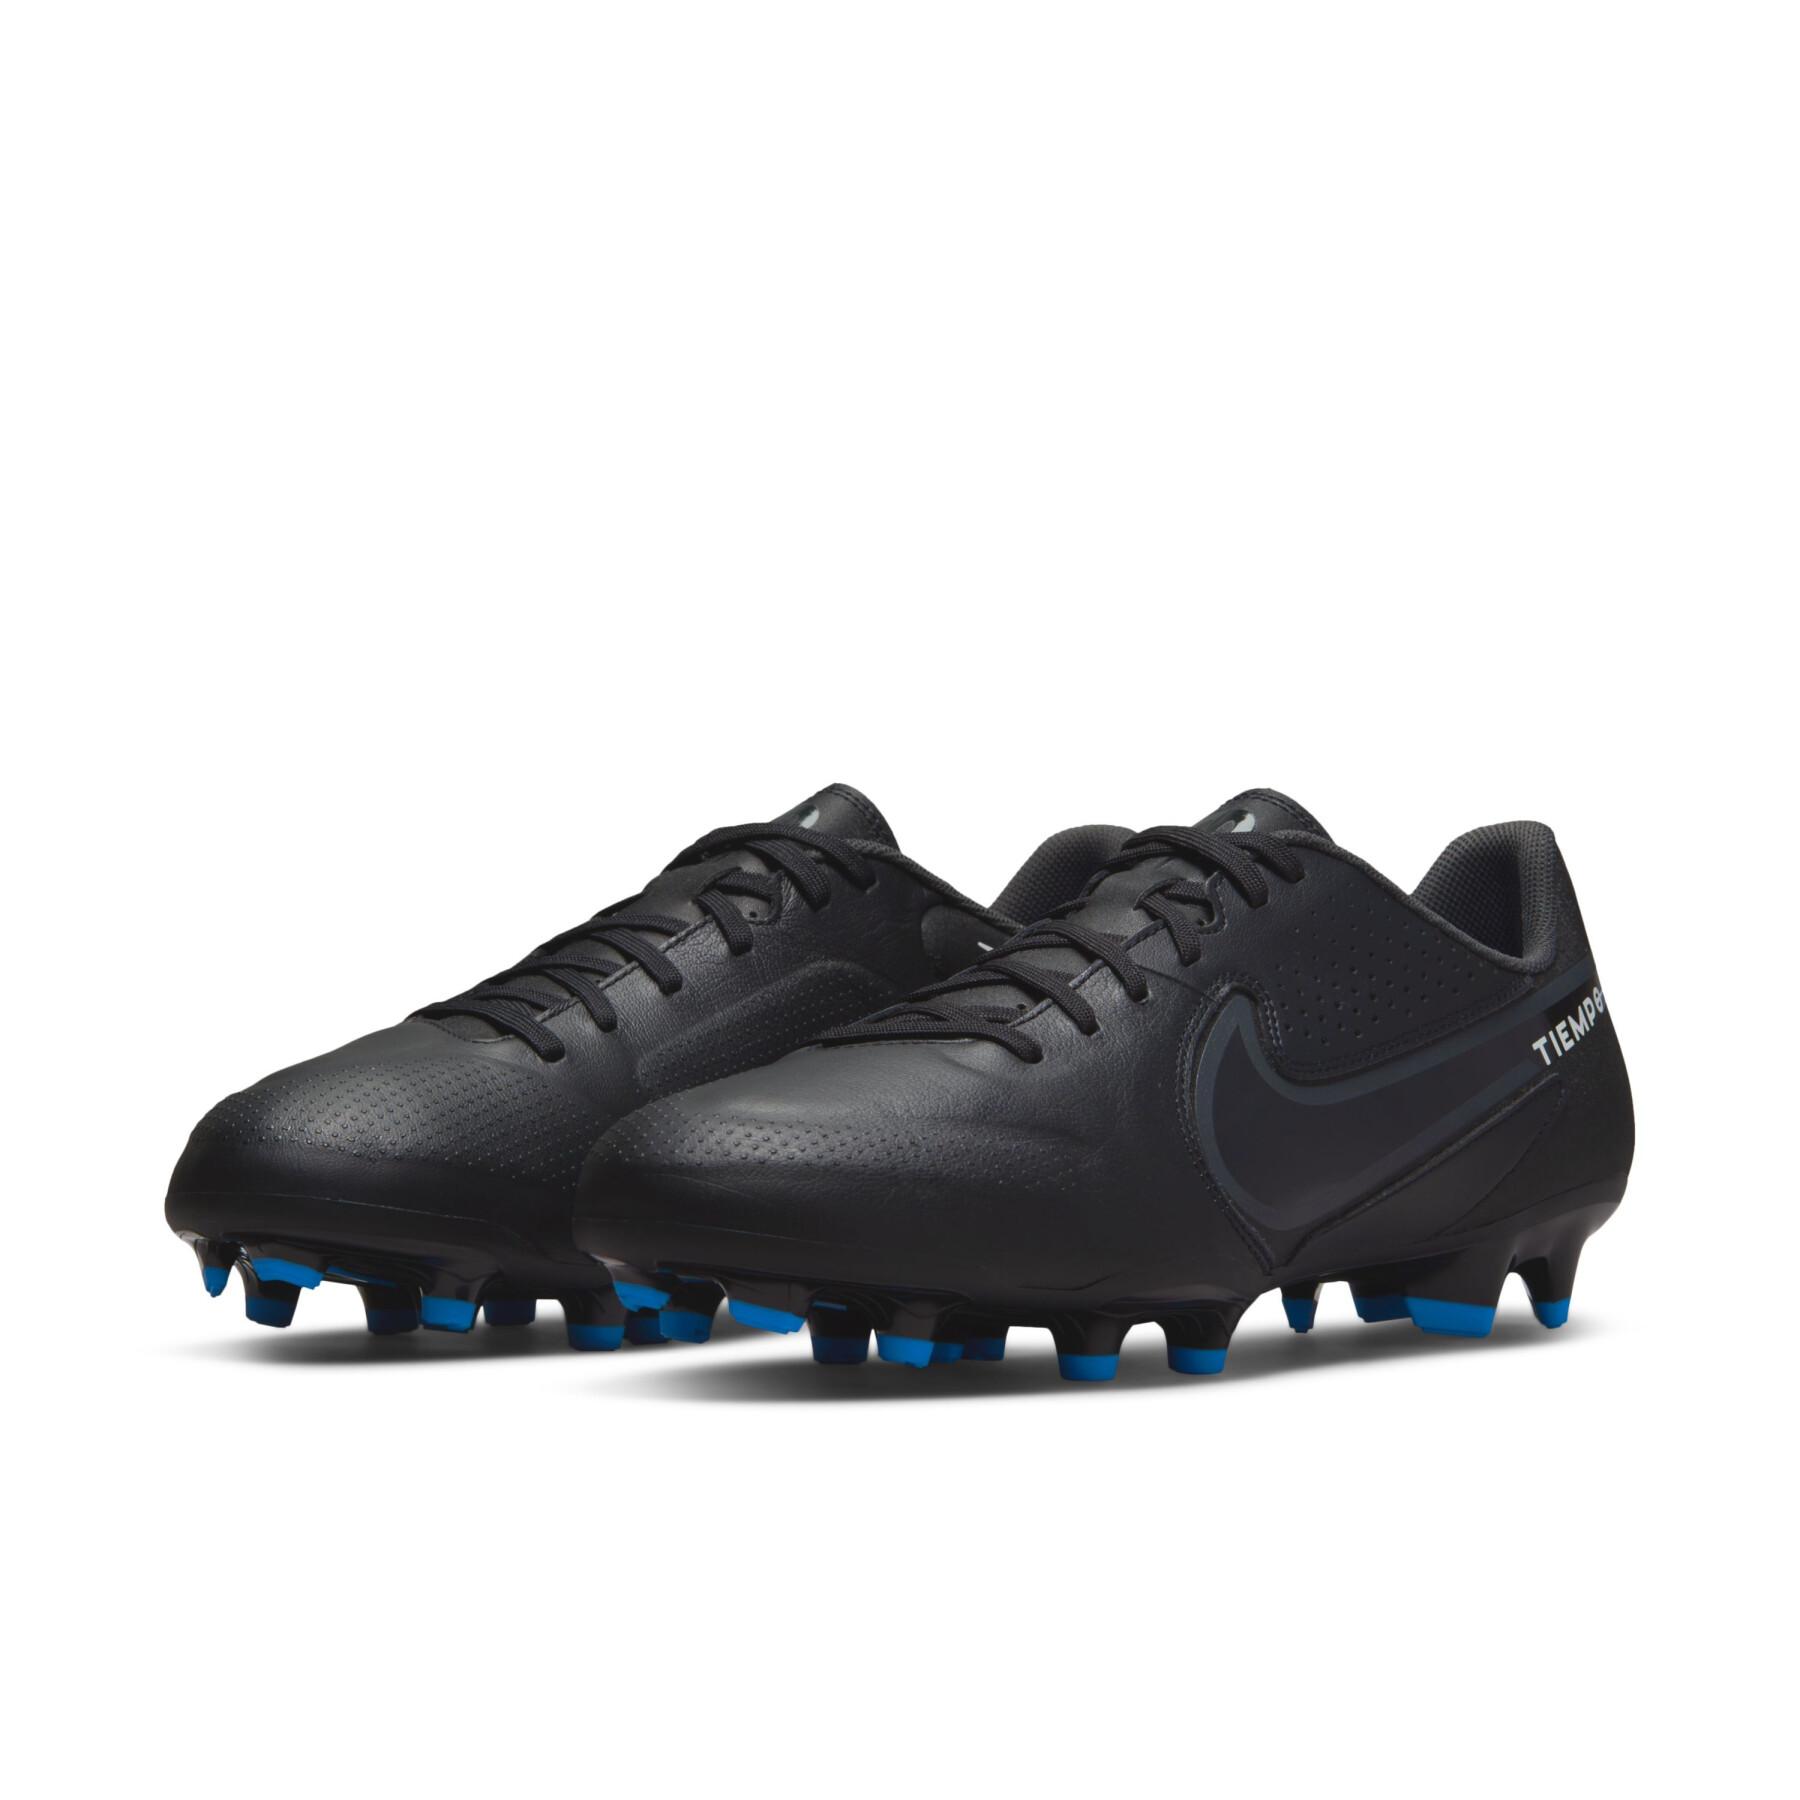 Soccer shoes Nike Tiempo Legend 9 Academy MG - Shadow Black Pack